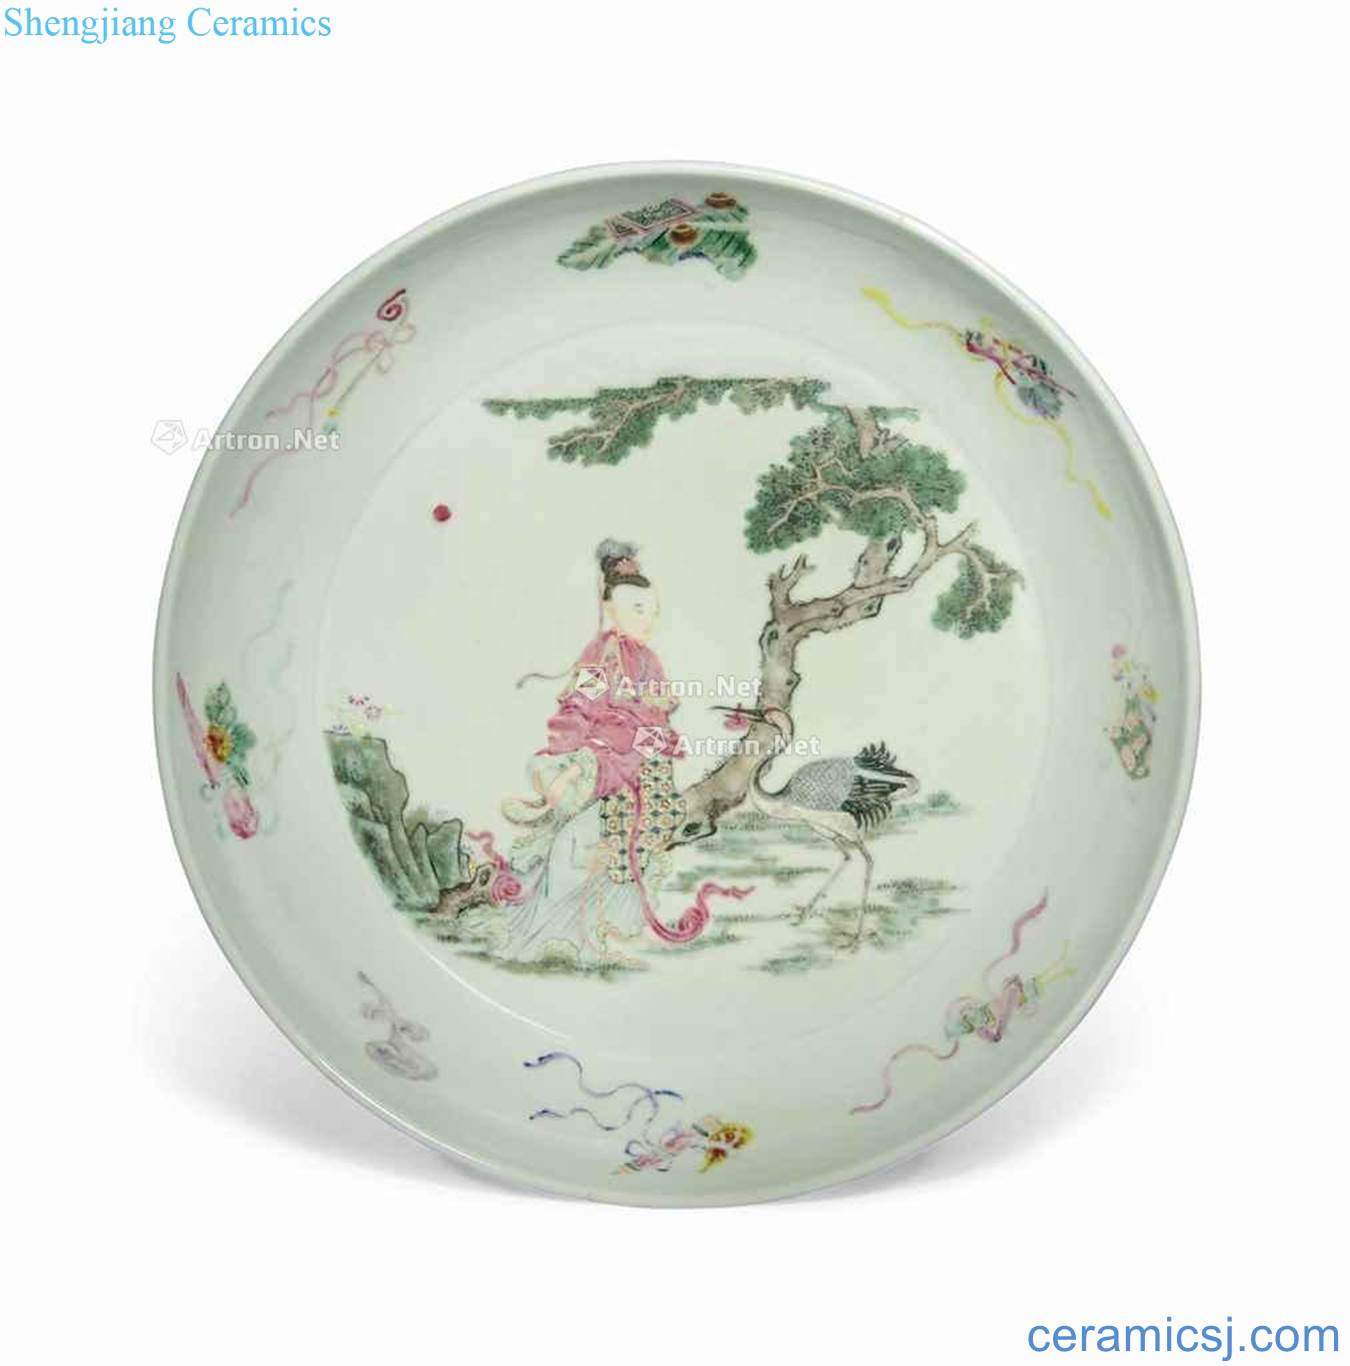 Porcelain of Ming, coloured drawing or pattern in the 18th century qing pastel fairies of the plate